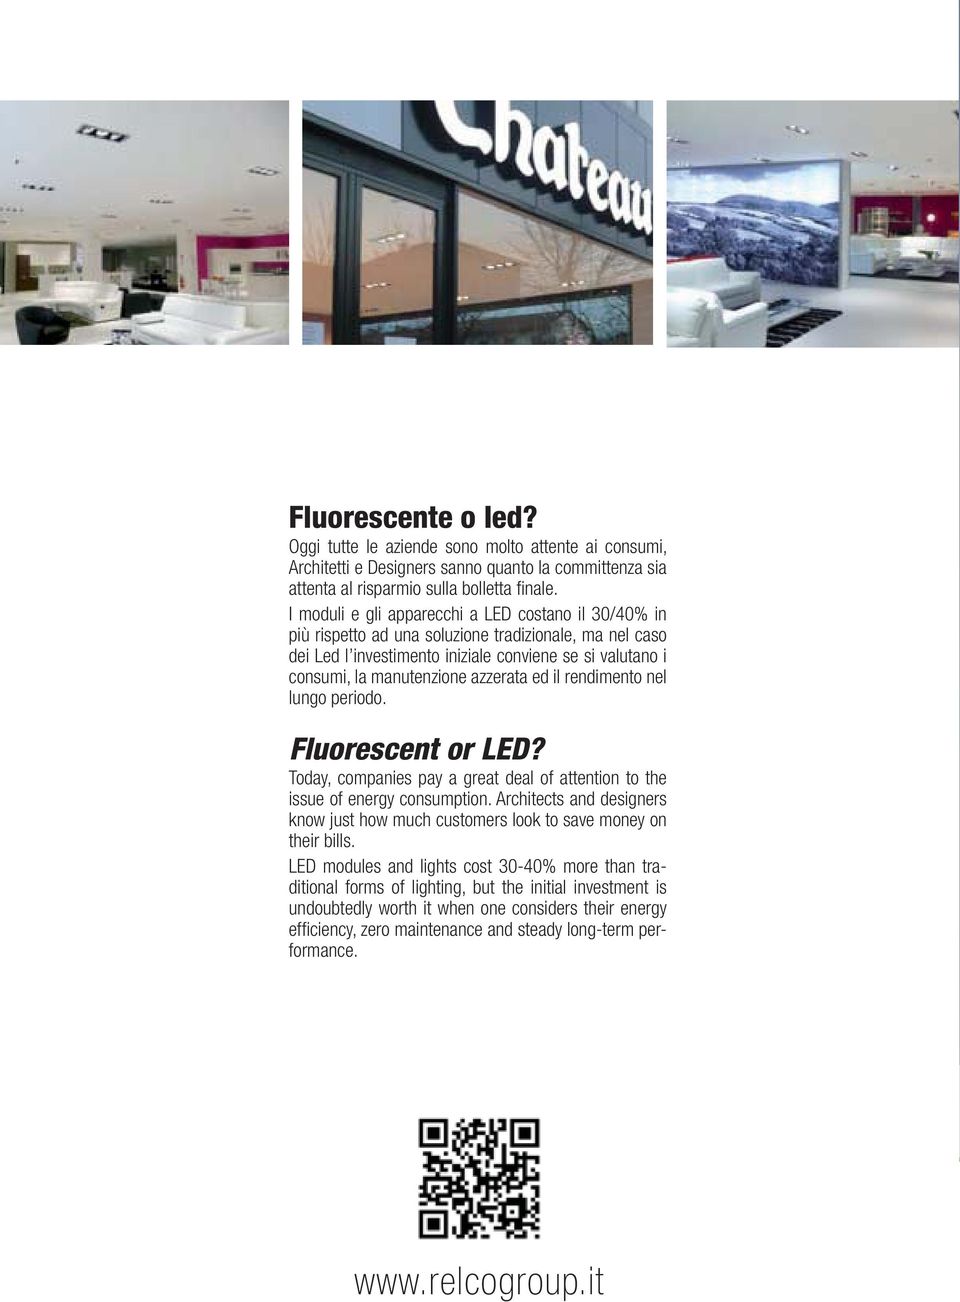 azzerata ed il rendimento nel lungo periodo. Fluorescent or LED? Today, companies pay a great deal of attention to the issue of energy consumption.